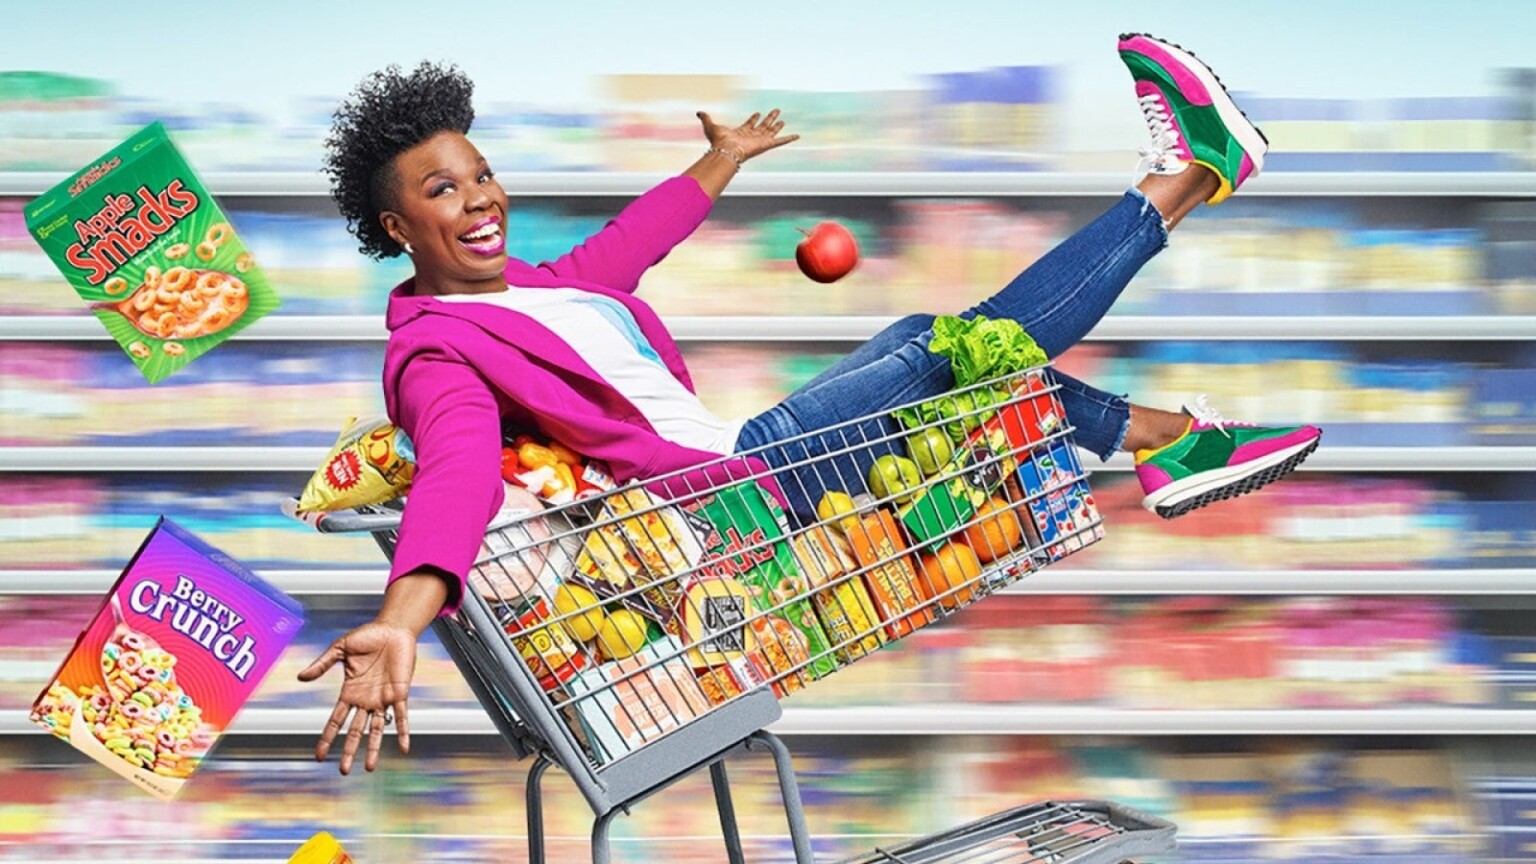 How to Watch 'Supermarket Sweep' Season 1 Online - Live Stream ABC